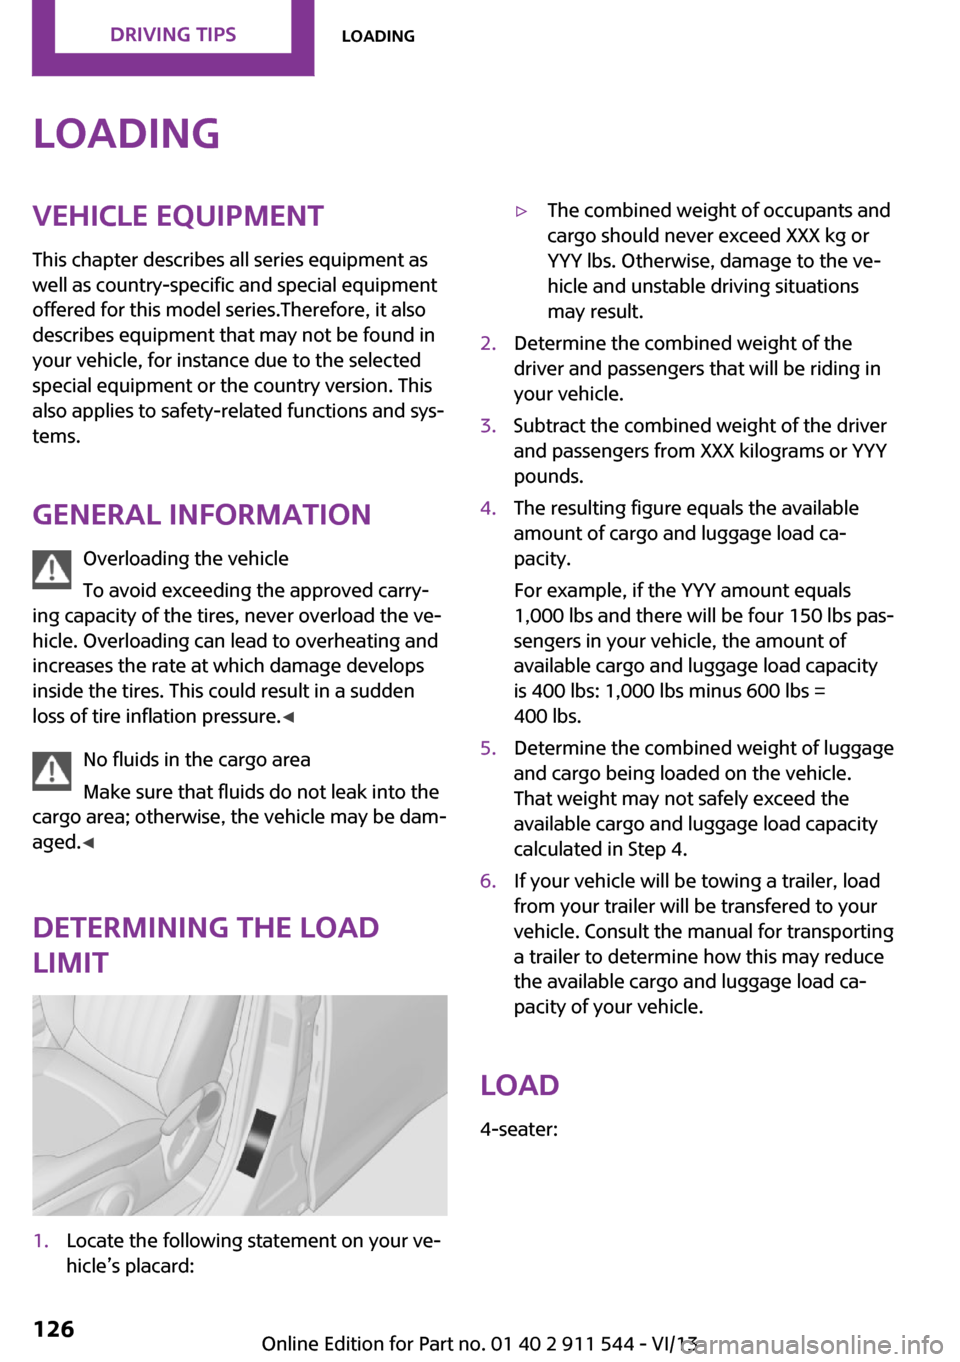 MINI Paceman 2014  Owners Manual (Mini Connected) LoadingVehicle equipment
This chapter describes all series equipment as
well as country-specific and special equipment
offered for this model series.Therefore, it also
describes equipment that may not